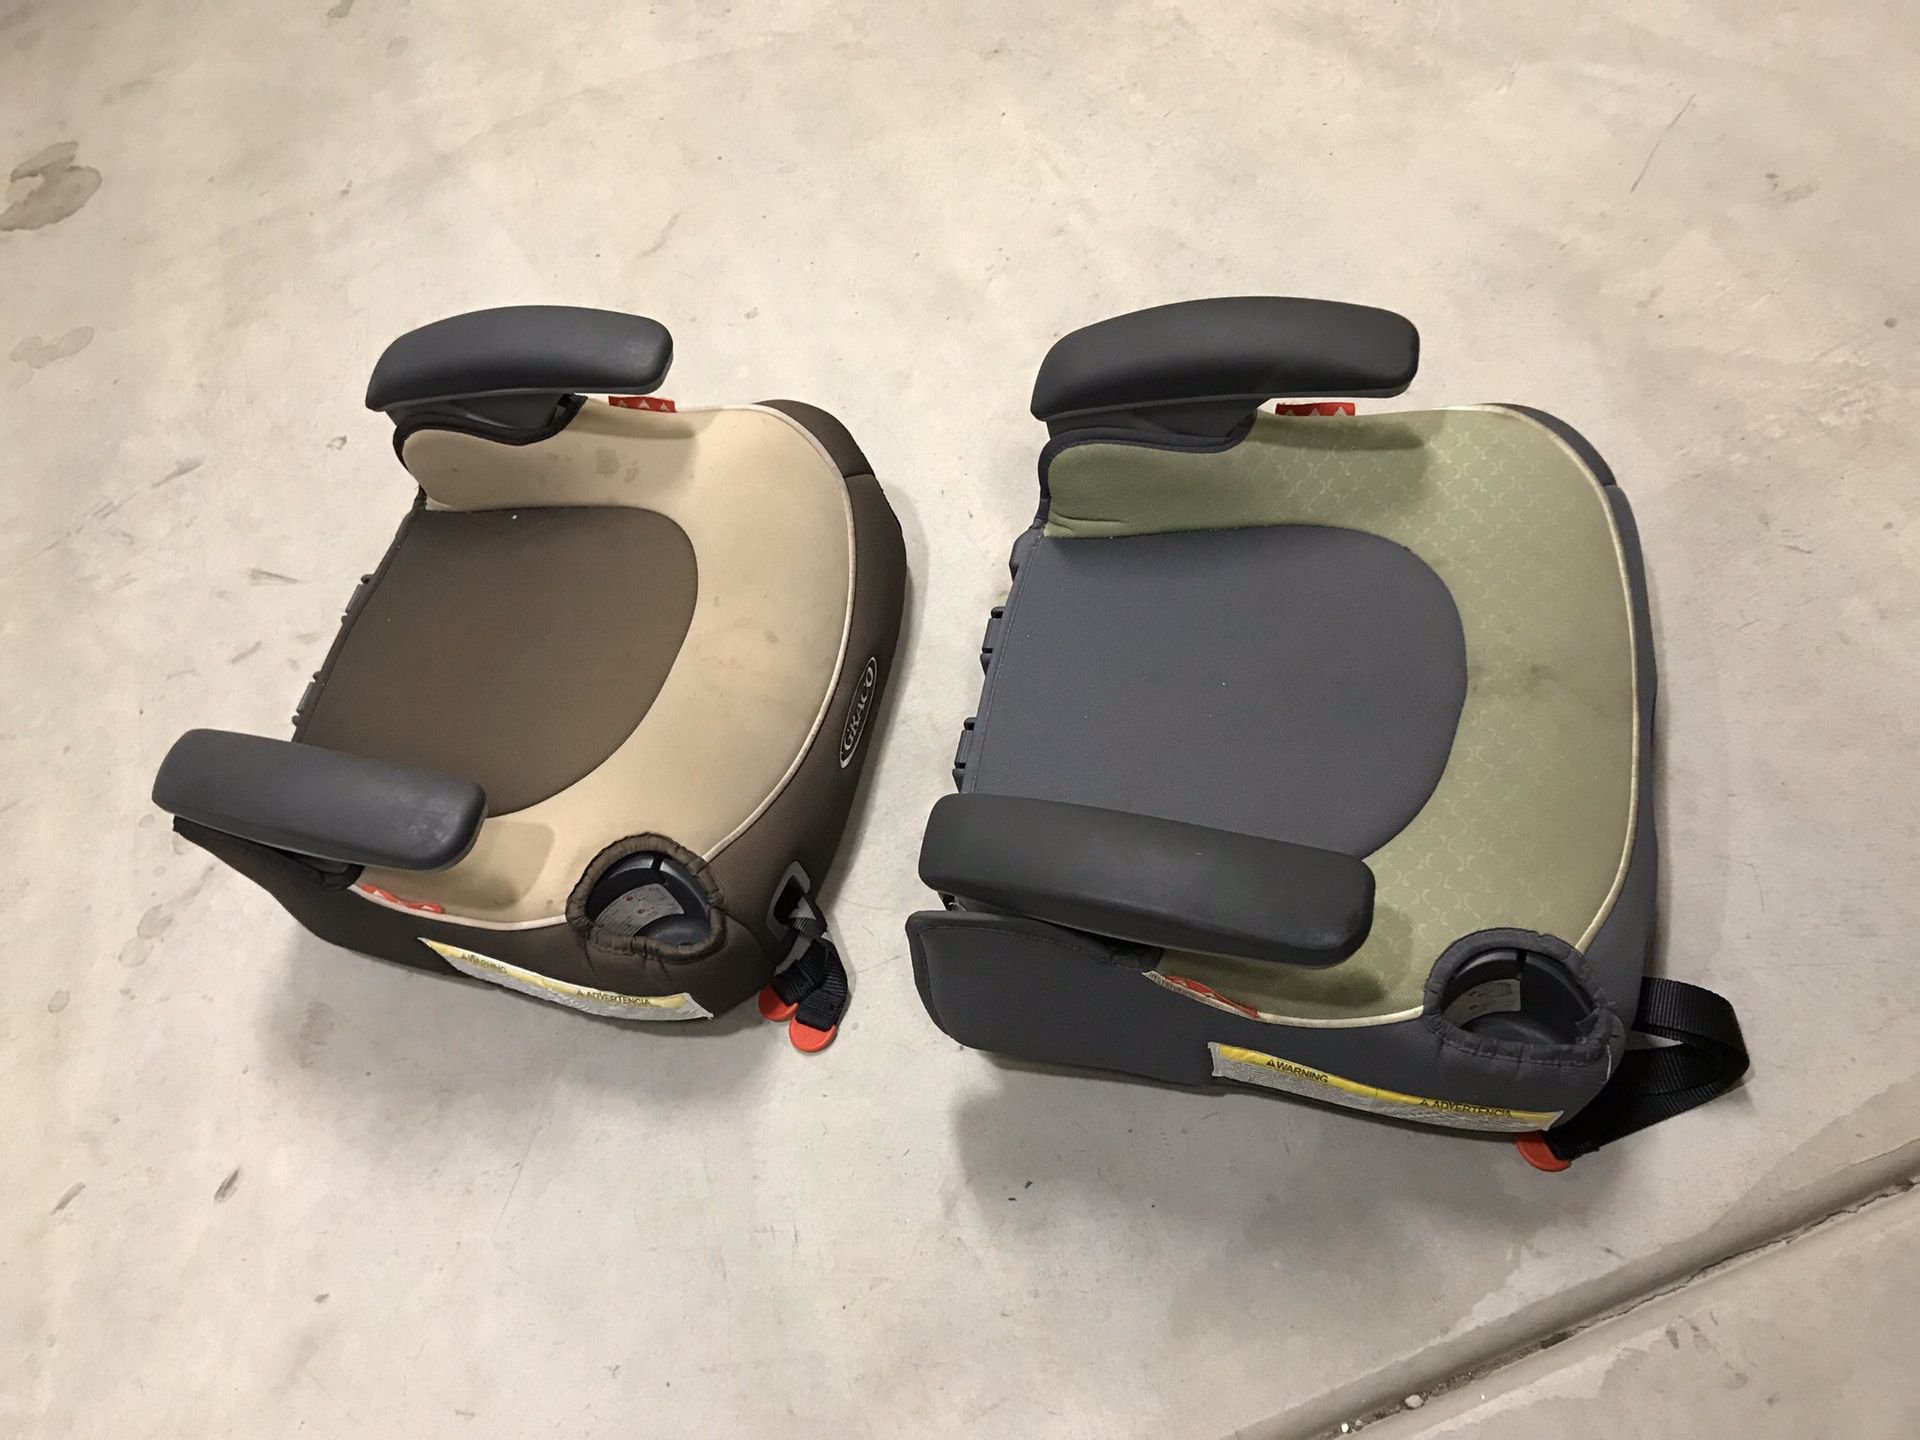 Two kids booster seats